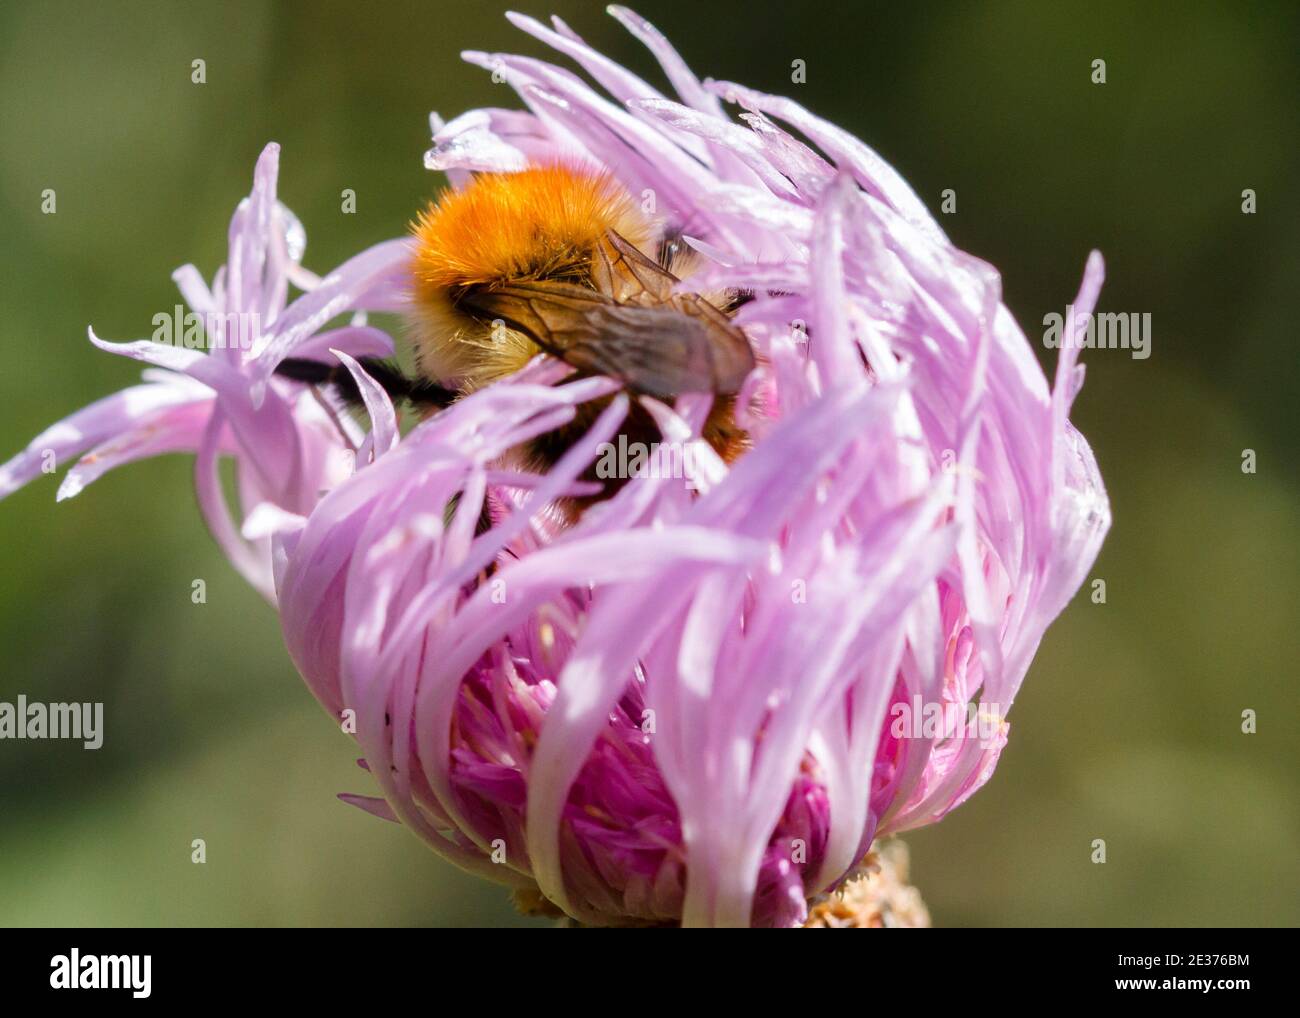 Bumblebee resting inside Succisella flower Stock Photo